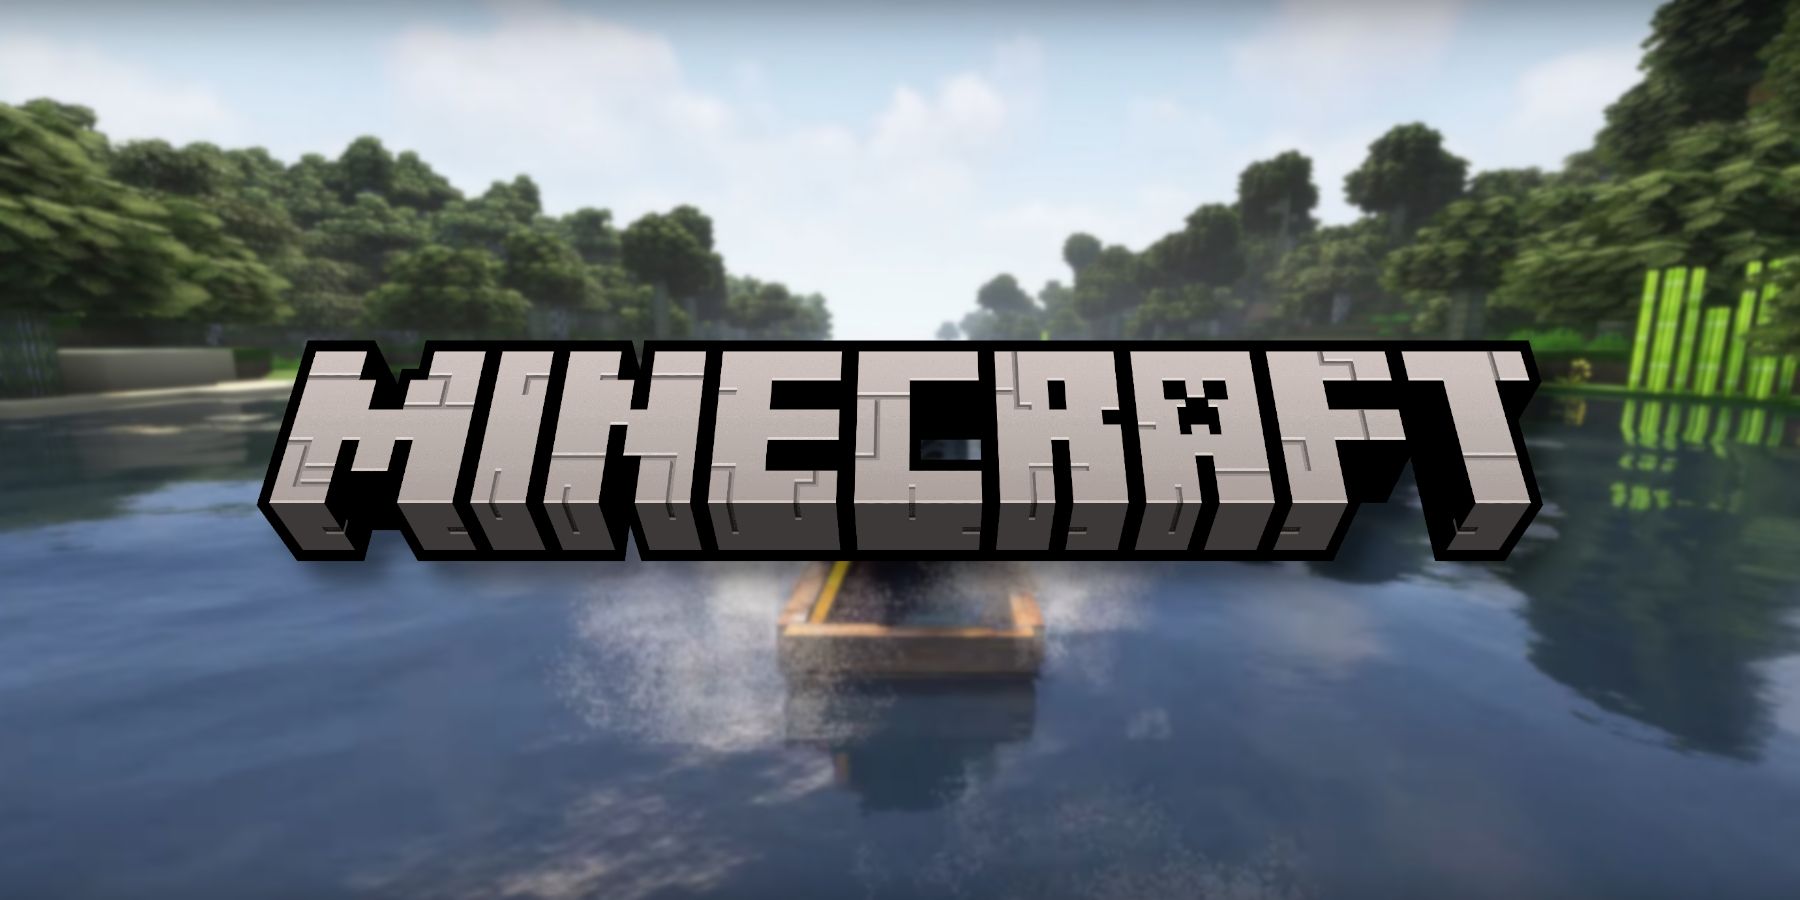 The Minecraft logo with the game in the background features realistic water images.